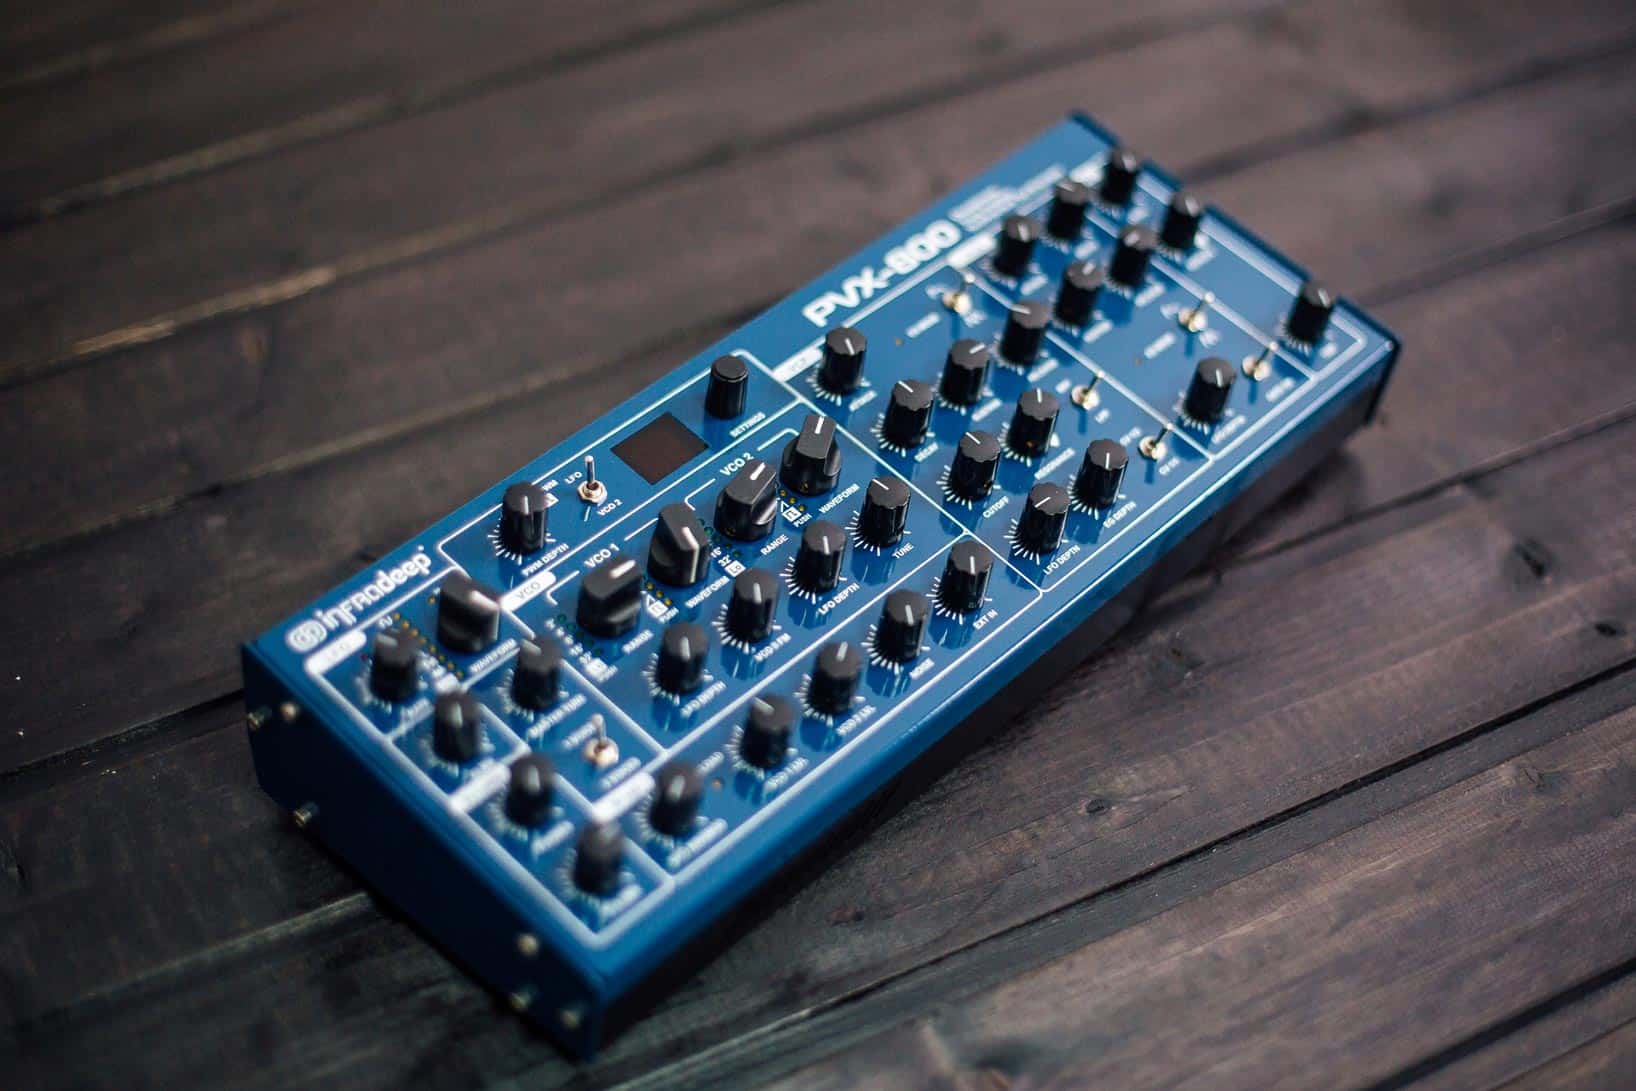 PVX-800 a Polyvox Inspired Analog Synthesizer by InfraDeep Electronics